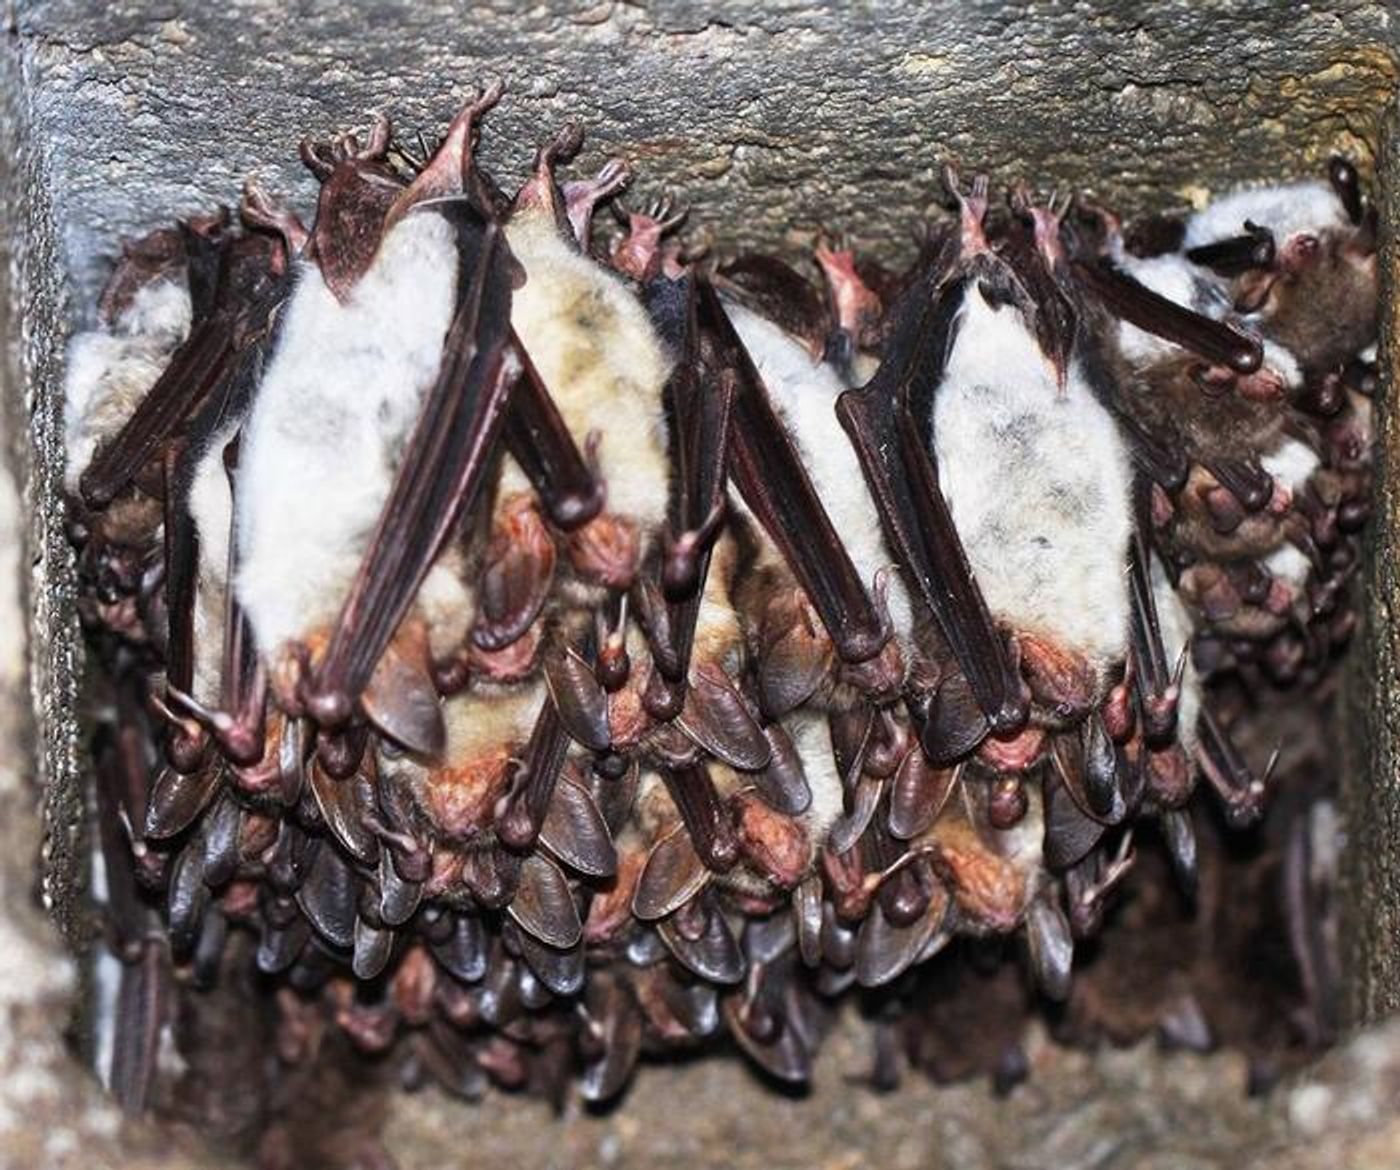 Myotis bats roosting together  Credit  Dr. Nicole Foley/Texas A&M University School of Veterinary Medicine and Biomedical Sciences